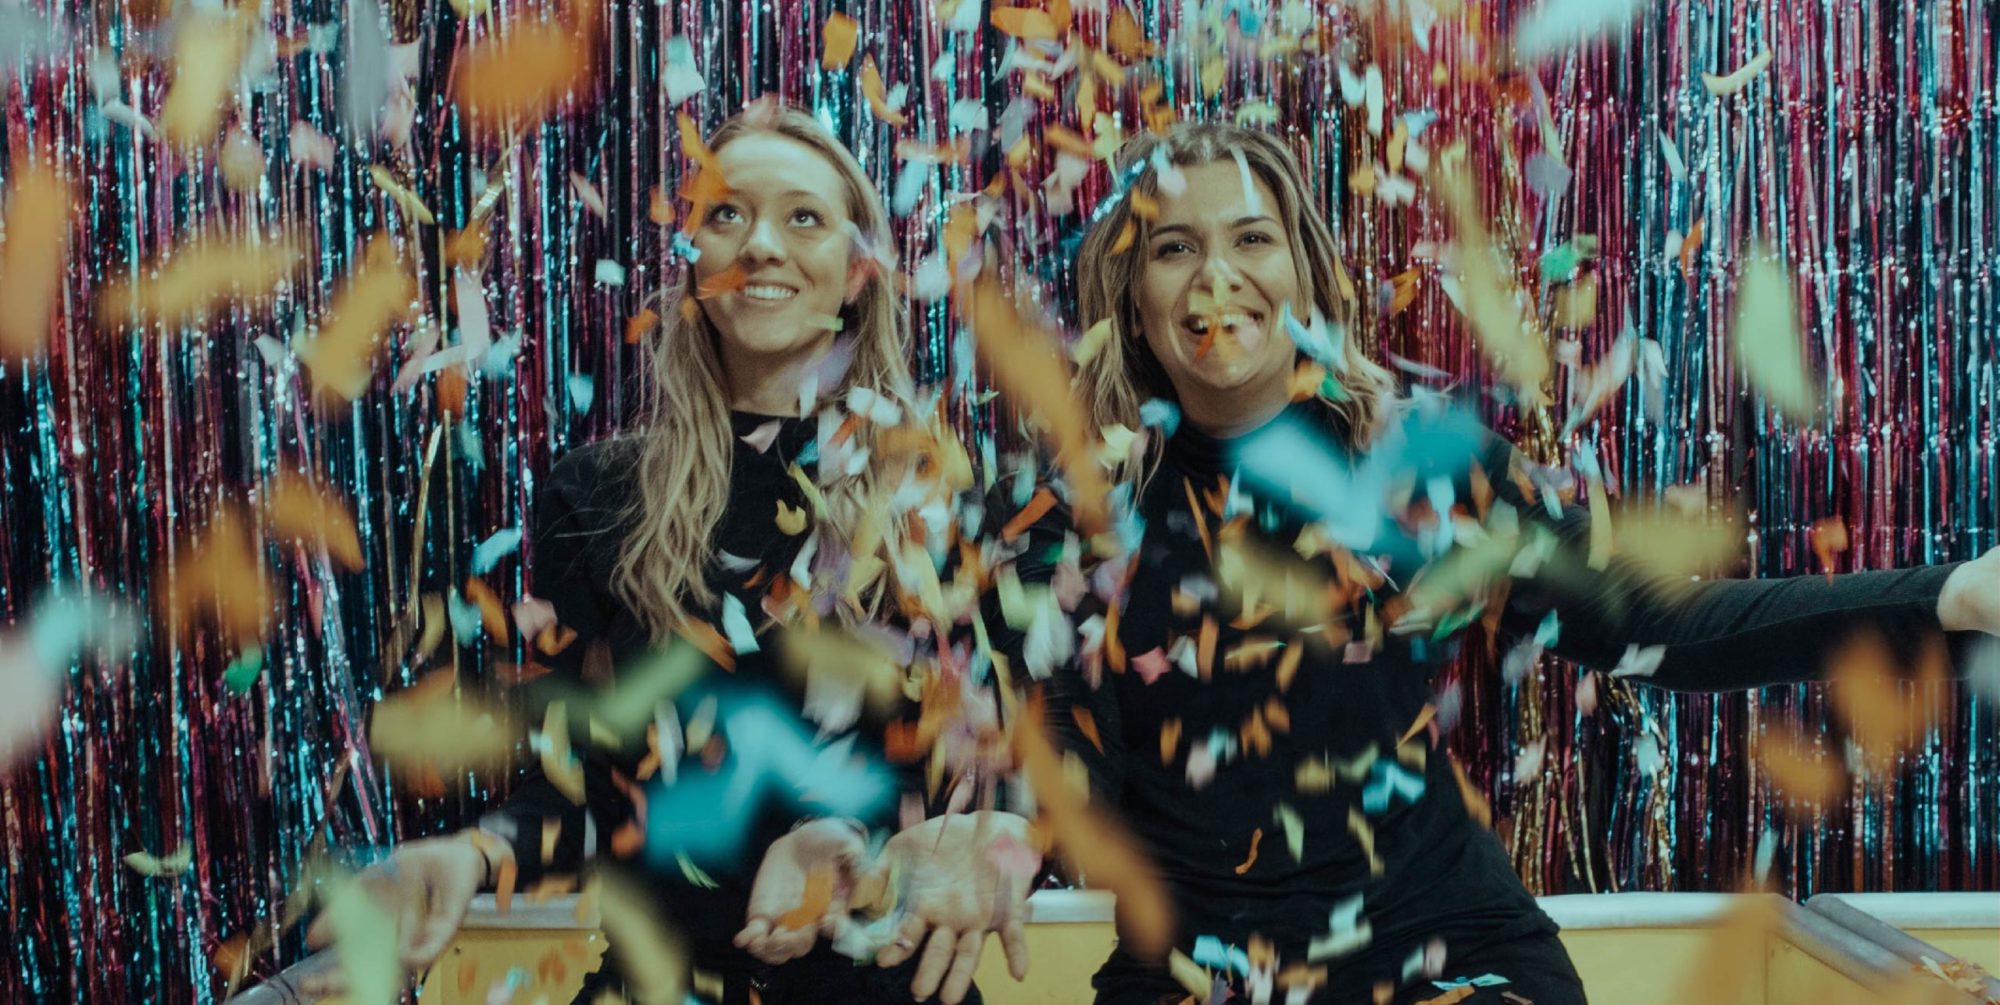 Two women smile at the camera while confetti falls on them.